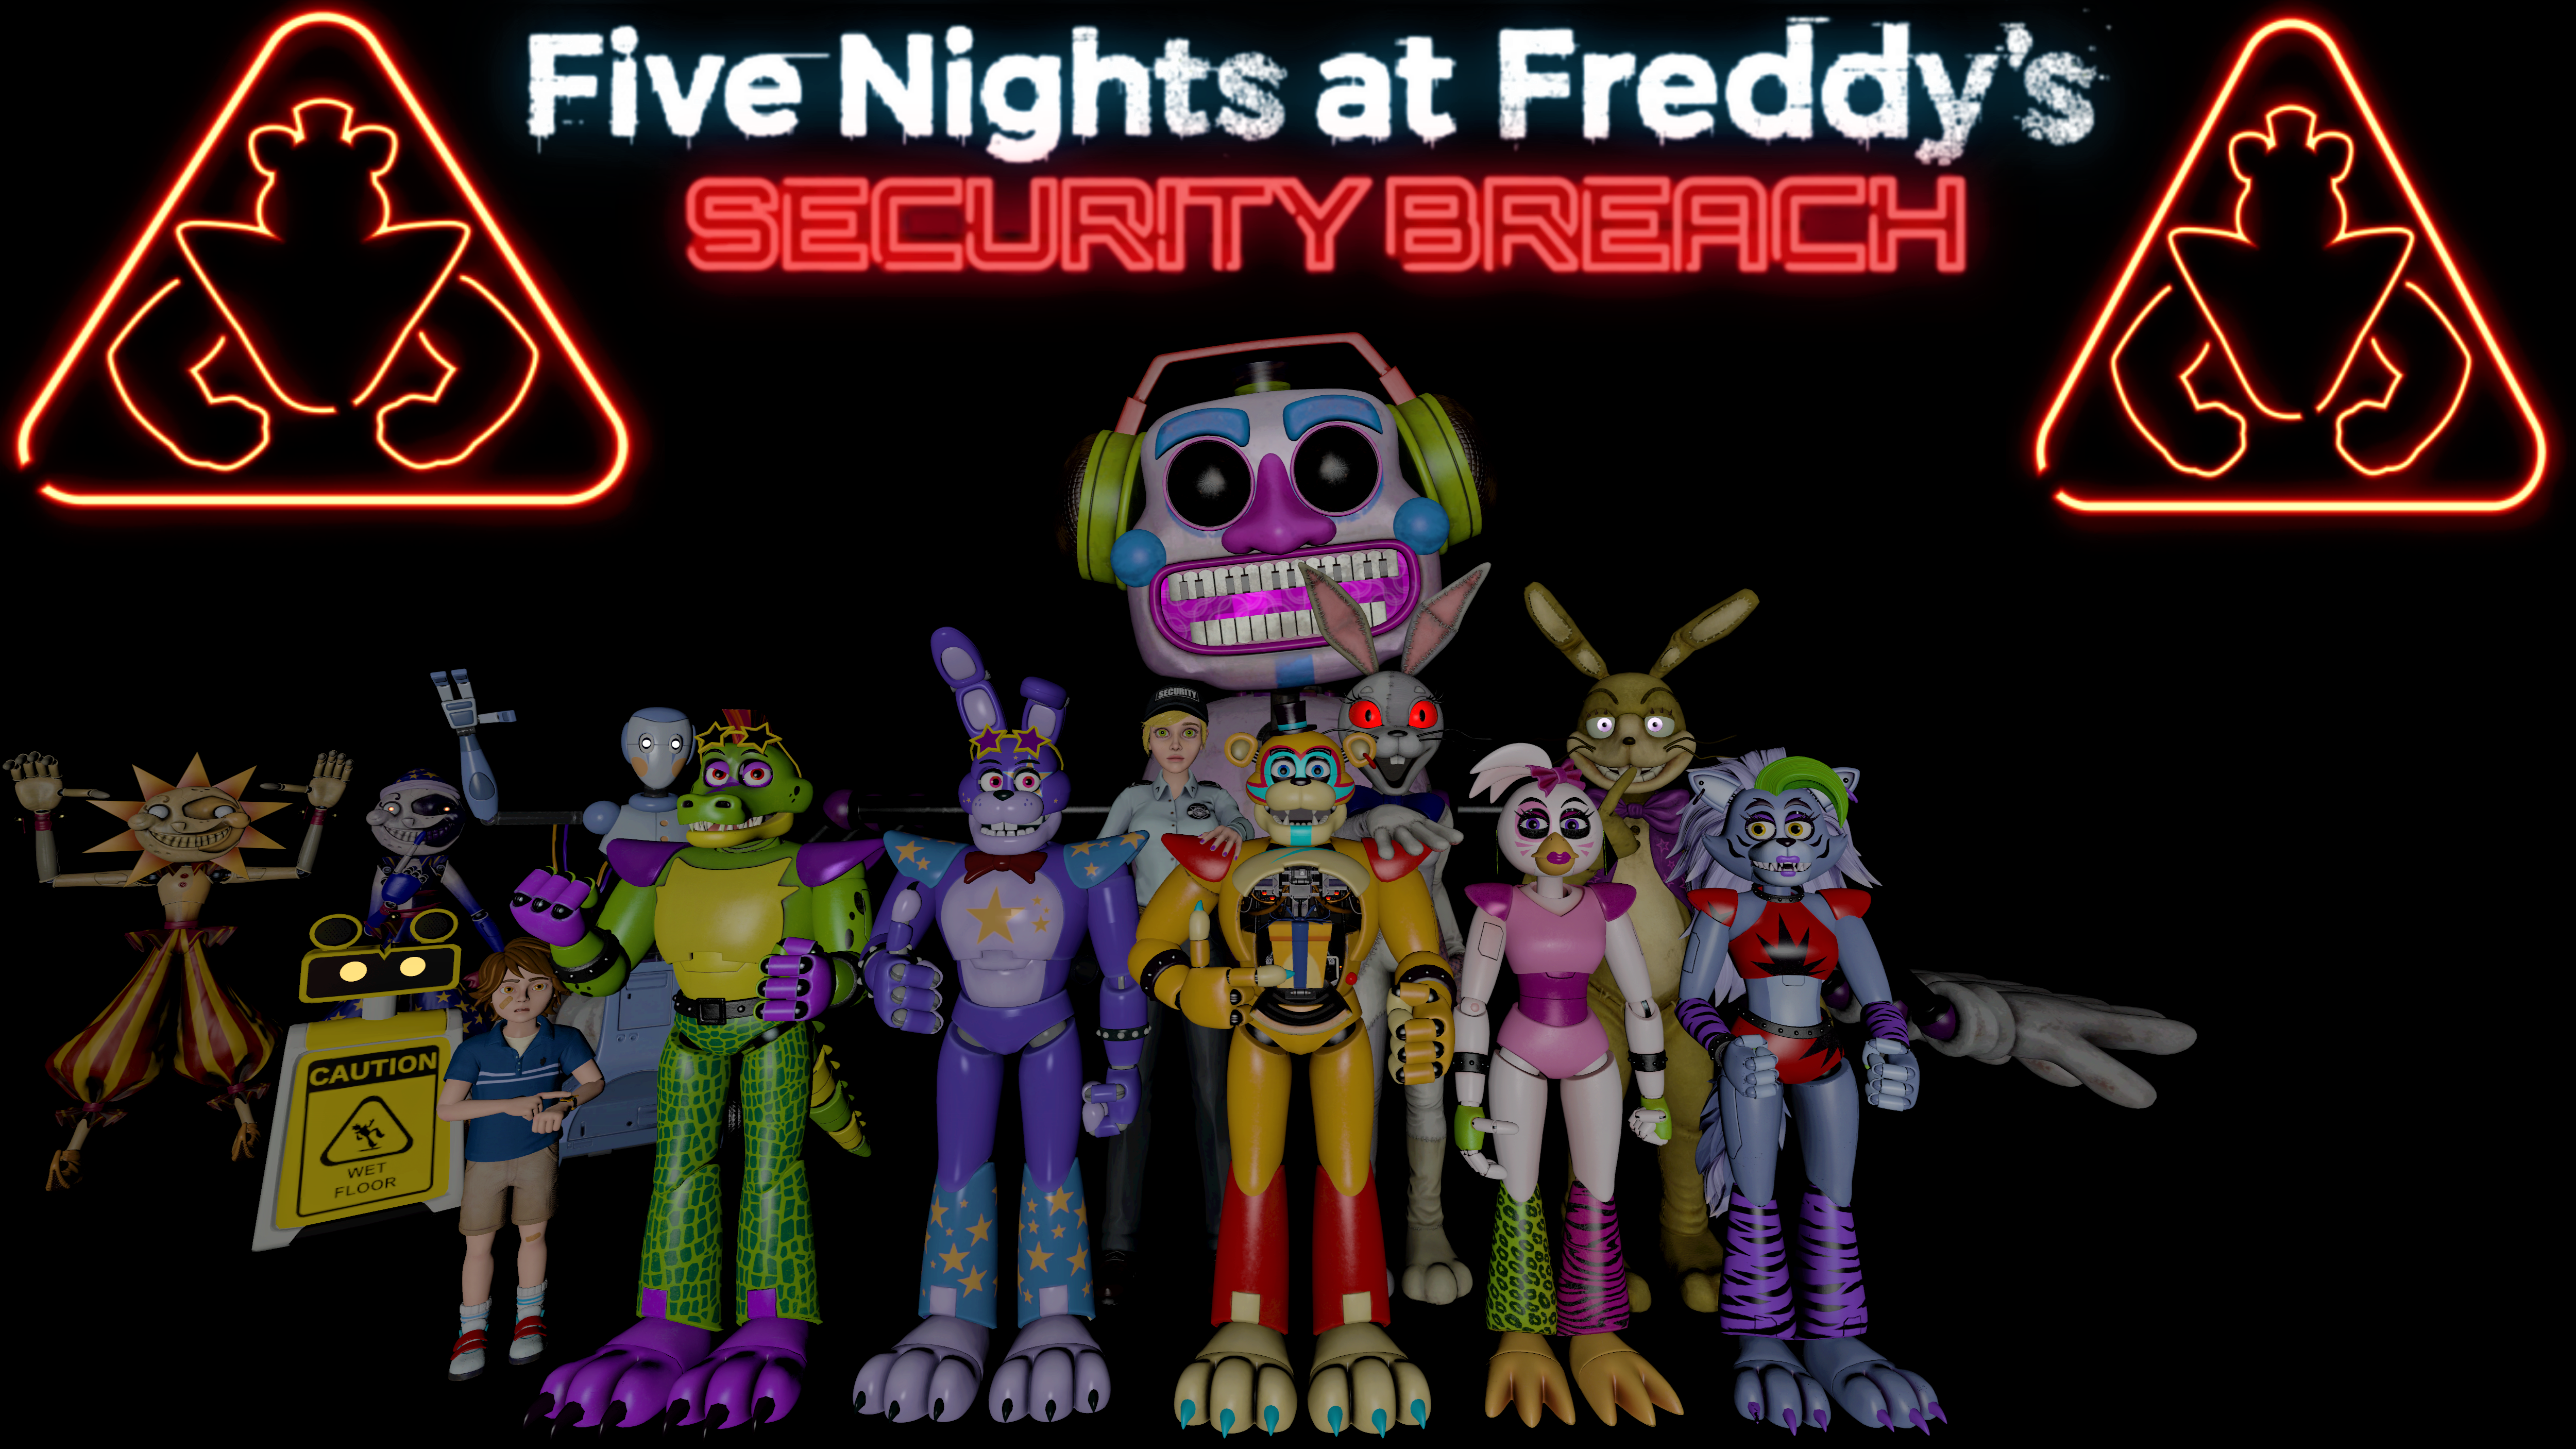 Five Nights at Freddy's: Security Breach - Part 1 